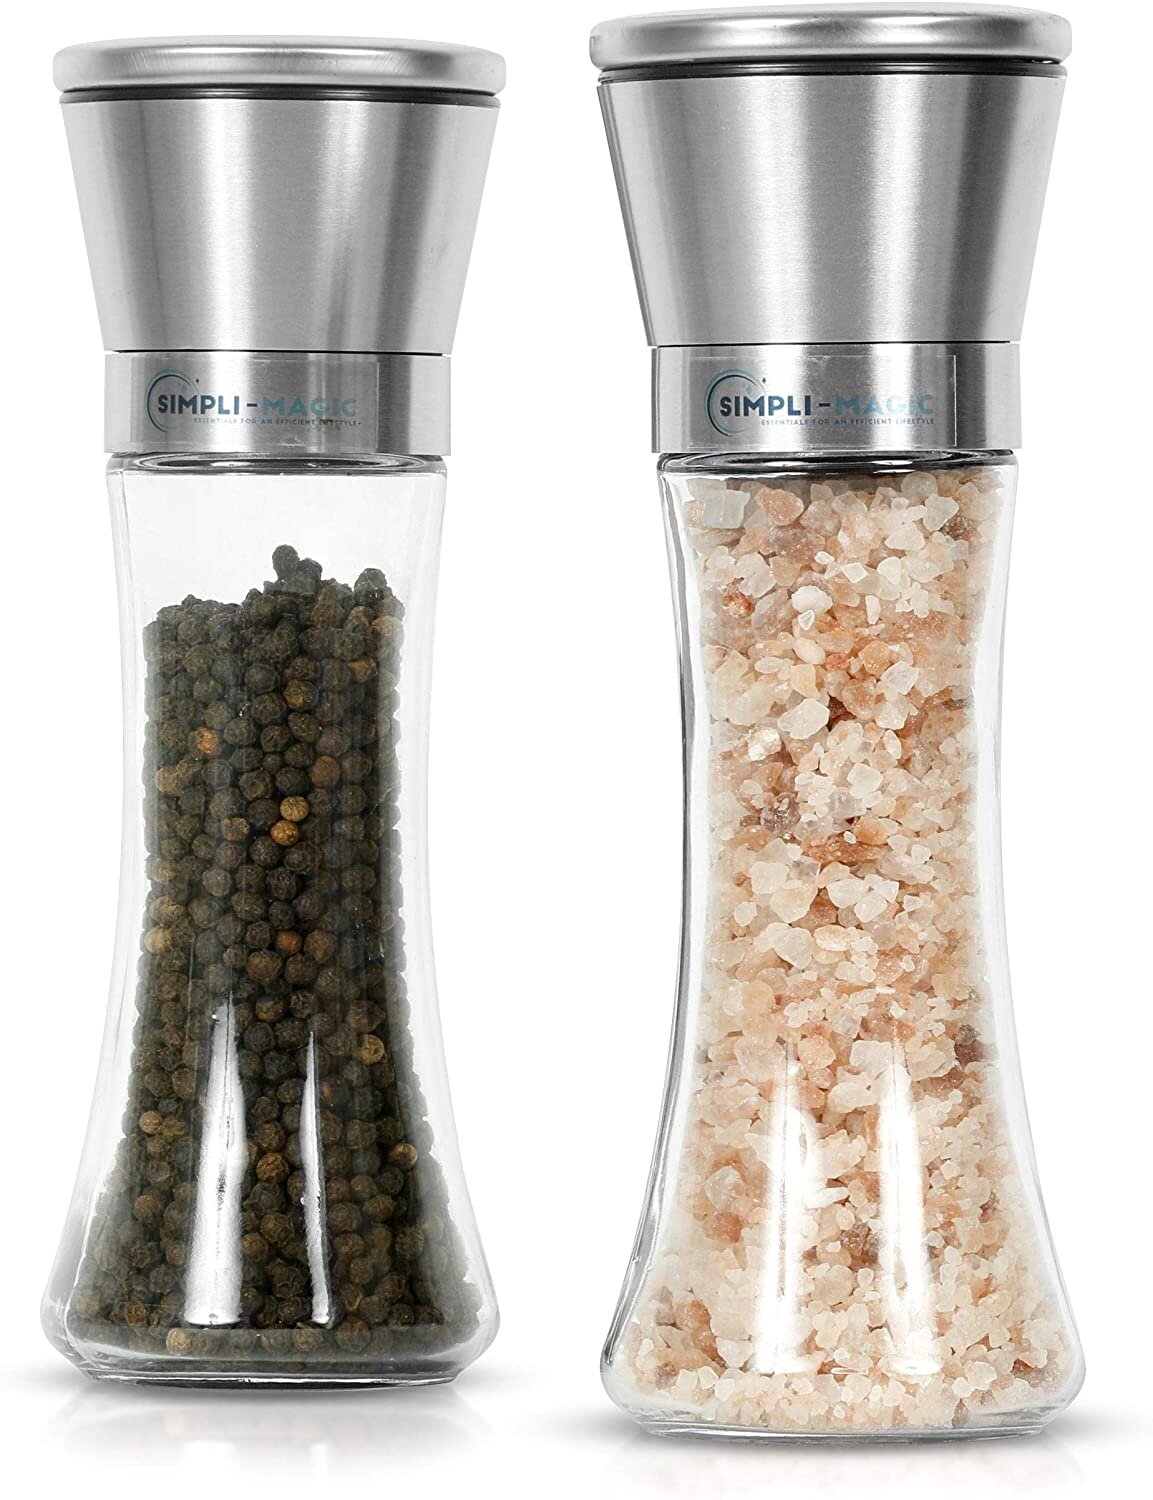 Large MKLZ Salt or Black Pepper Grinder for Cooking,With Handle on Top,Manual Stainless Steel Faucet Salt Shaker Mill,Kitchen Refillable Adjustable Coarseness,for Professional Chef